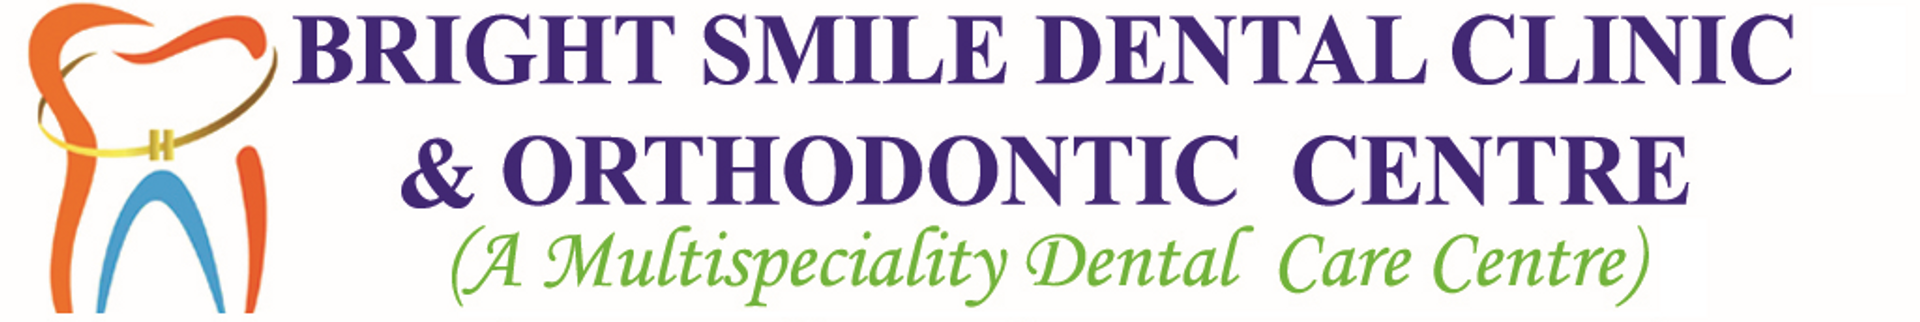 Bright Smile Dental Clinic Orthodontic and Implant Center|Hospitals|Medical Services